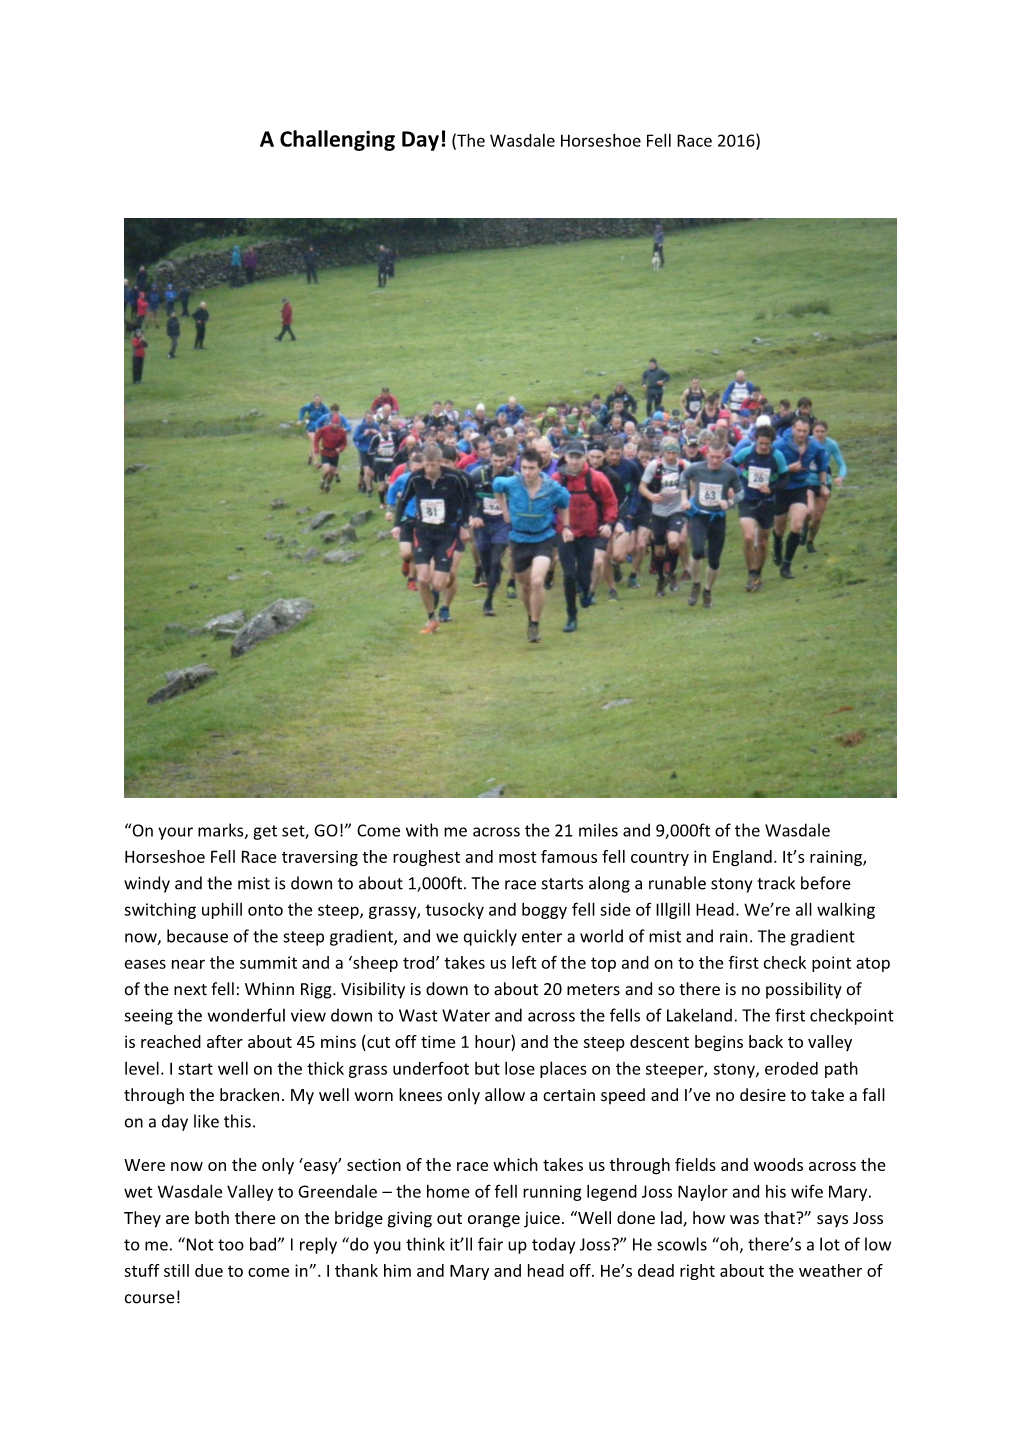 A Challenging Day!(The Wasdale Horseshoe Fell Race 2016) “On